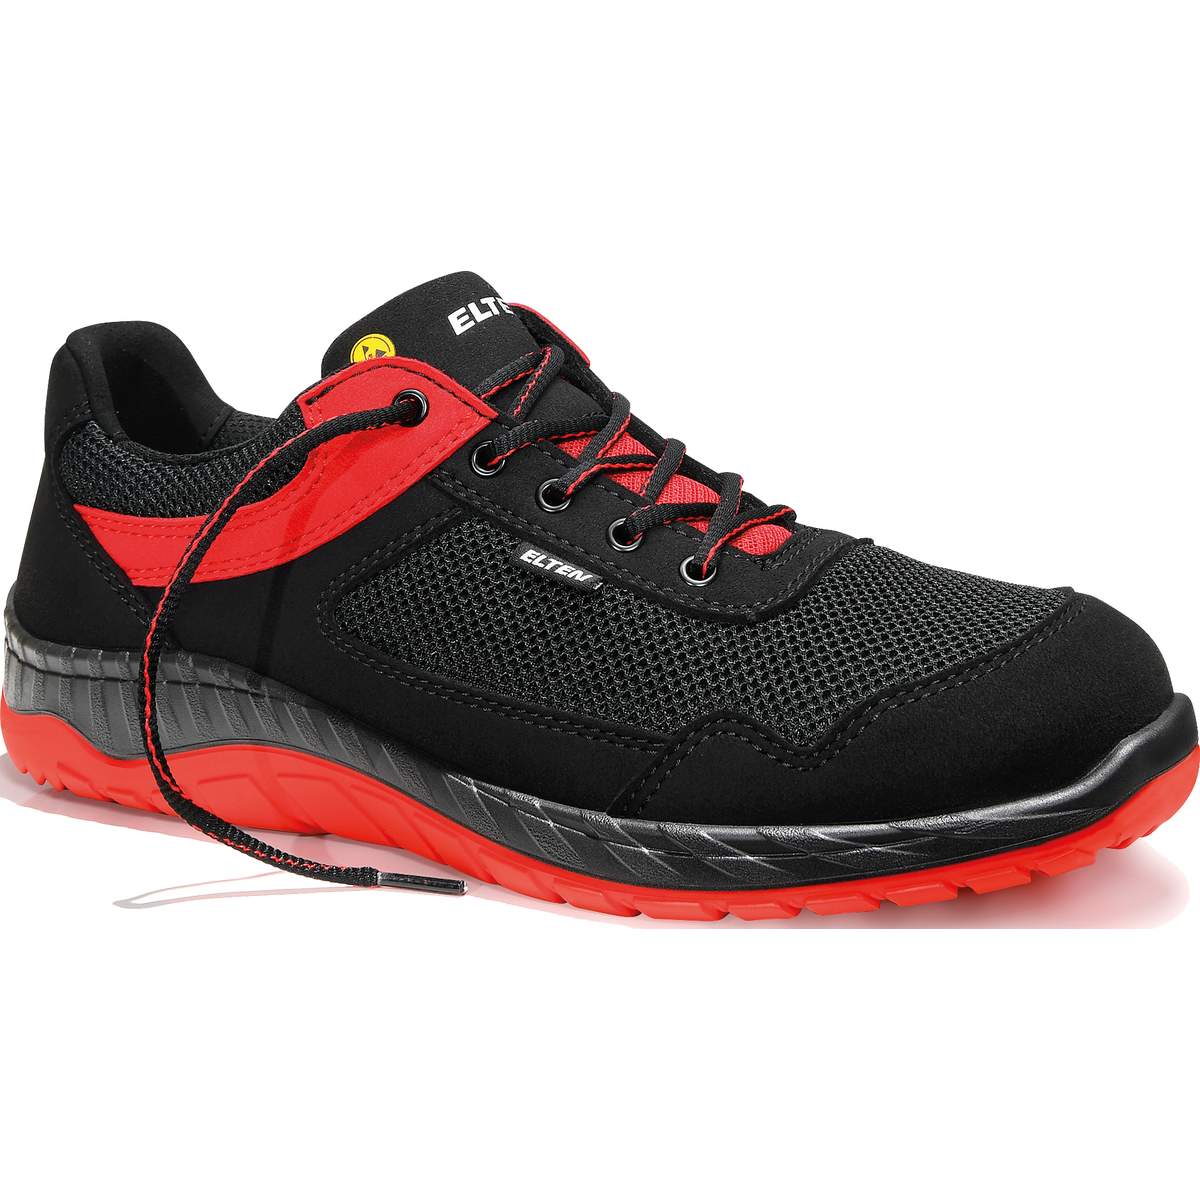 ELTEN LONNY red Low ESD S1P Sicherheitshalbschuhe | Sicherheitsschuhe S1 |  Arbeitsschuhe Herren | Sicherheitsschuhe